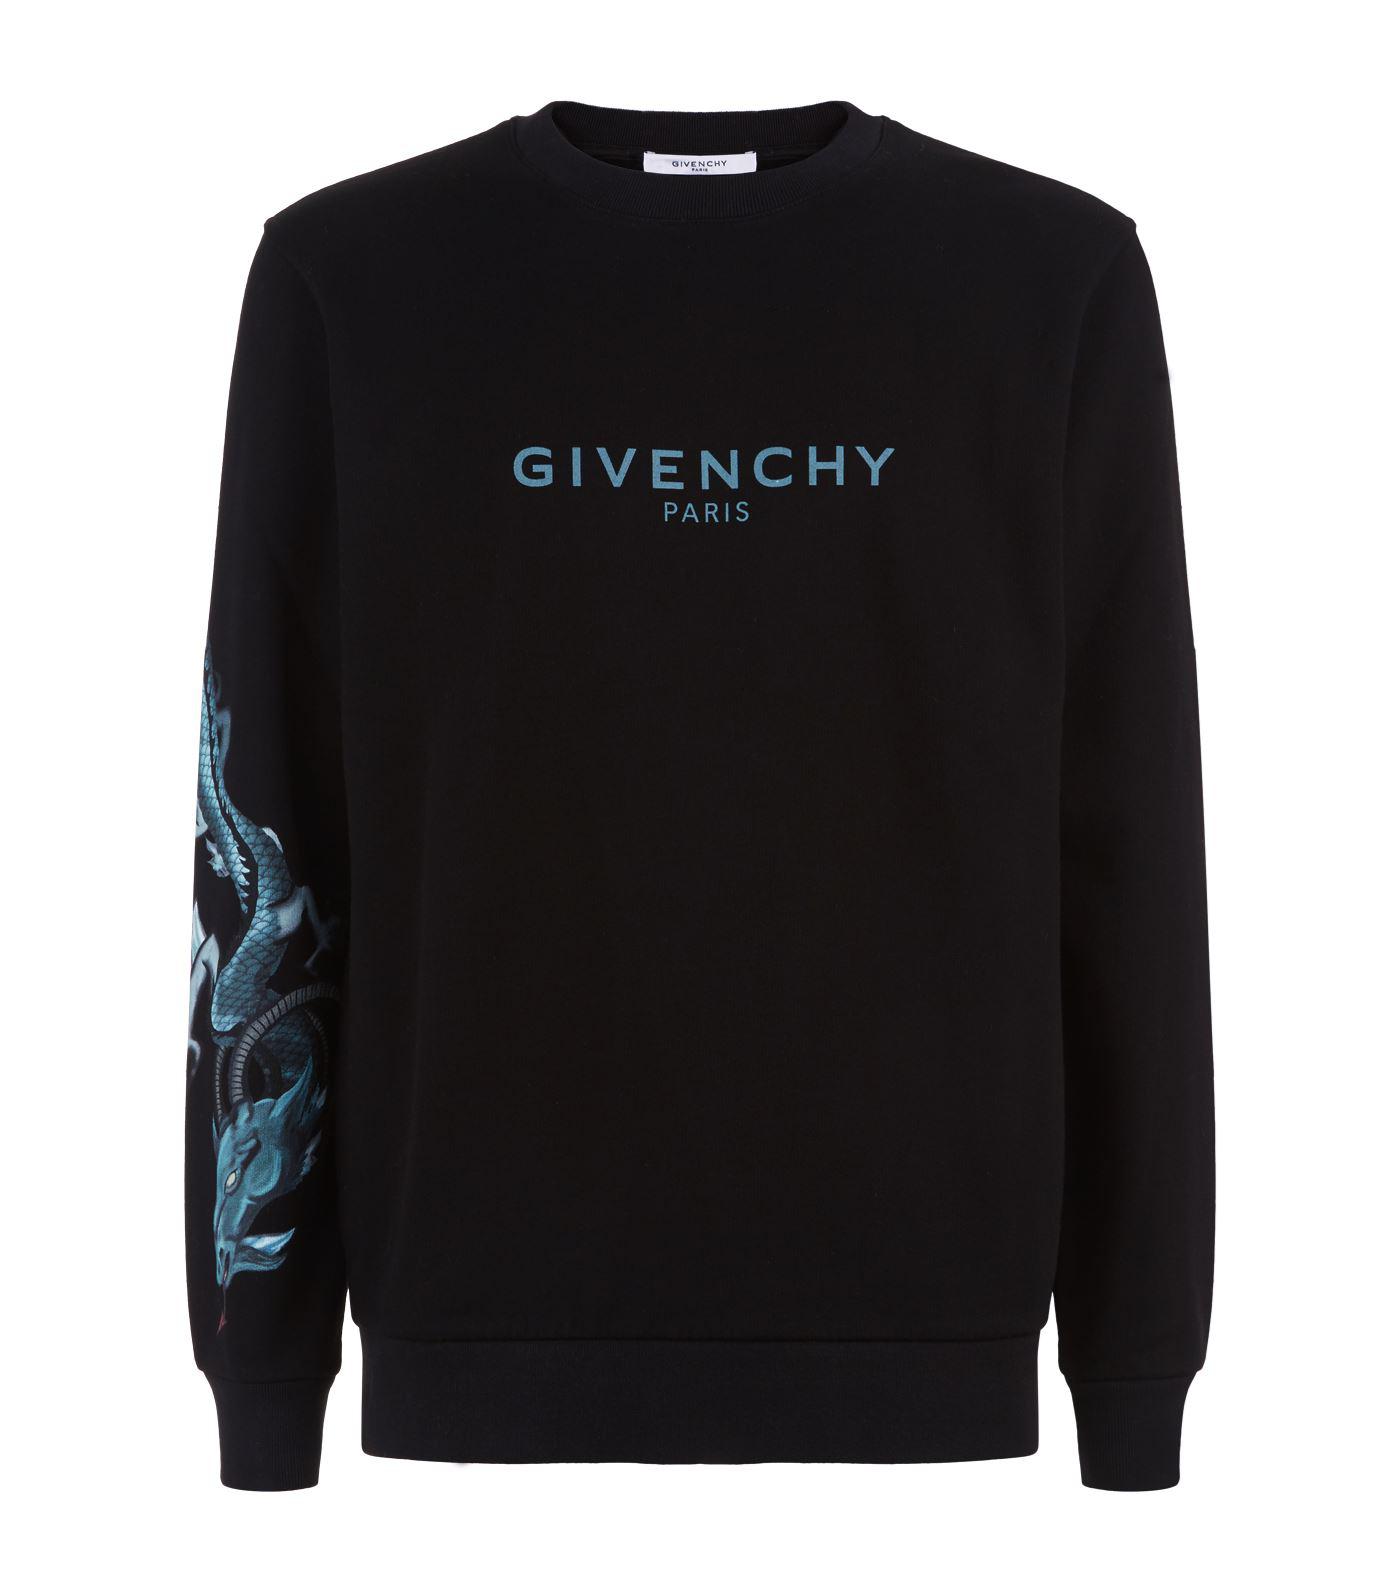 givenchy hoodie capricorn